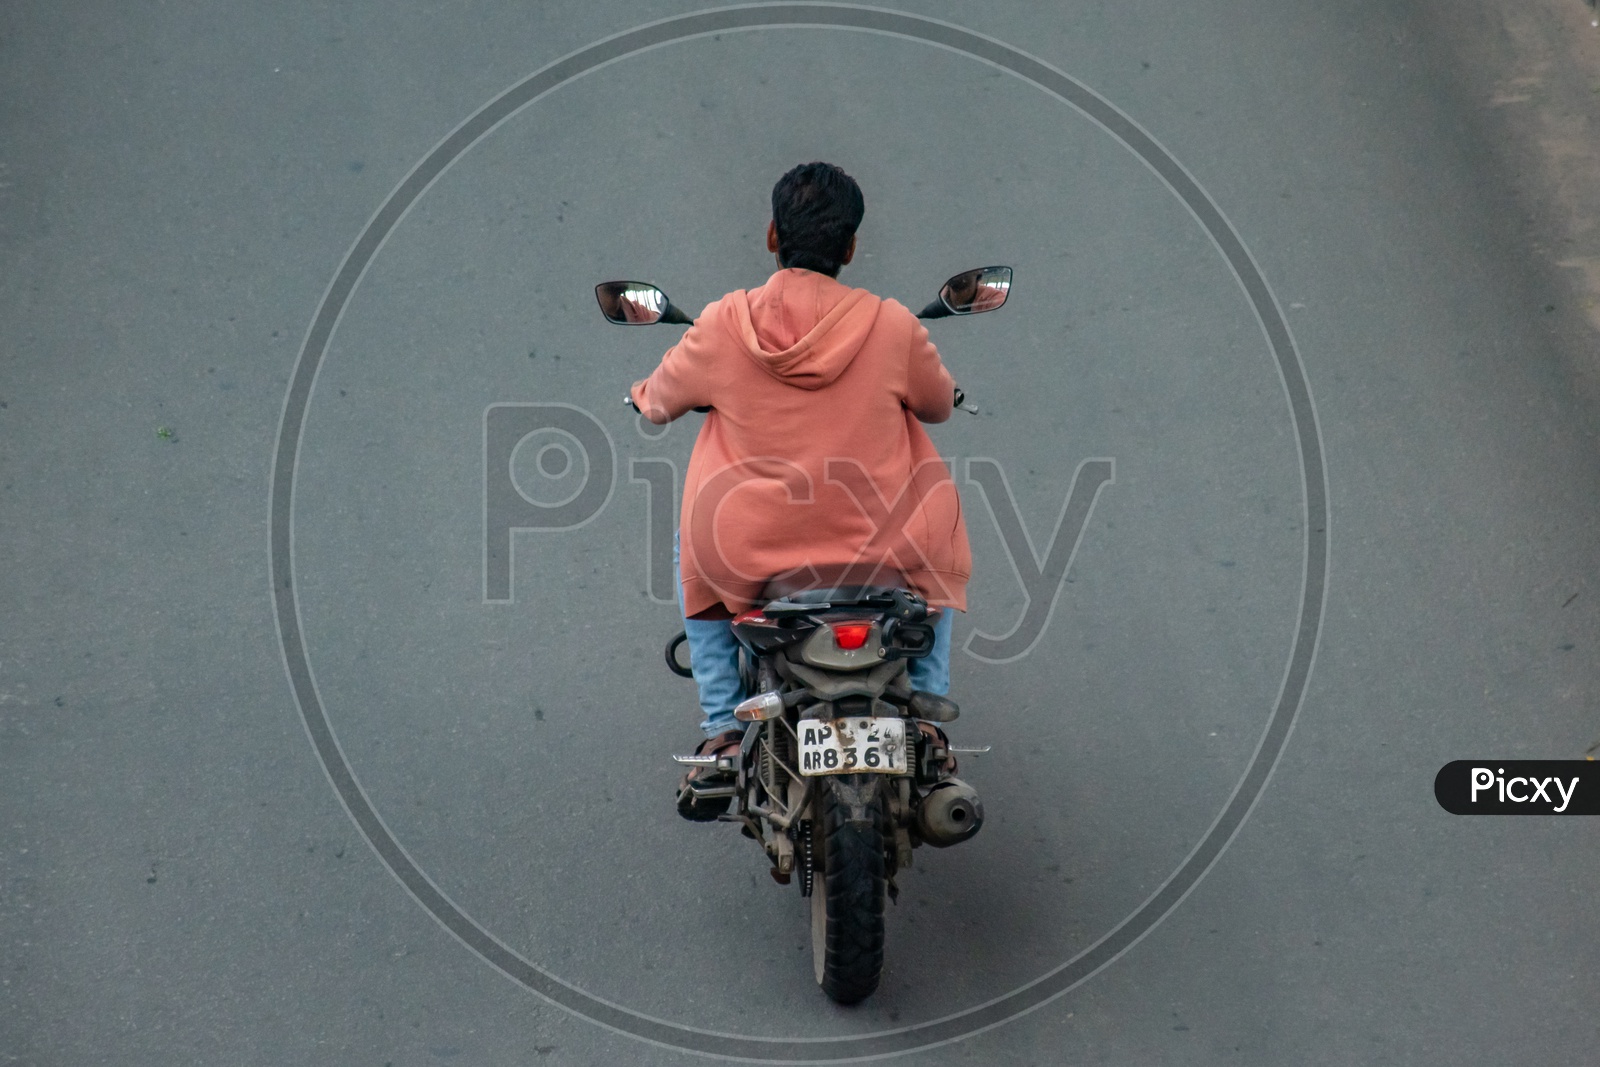 Riding a motor bike with irregular number plate.